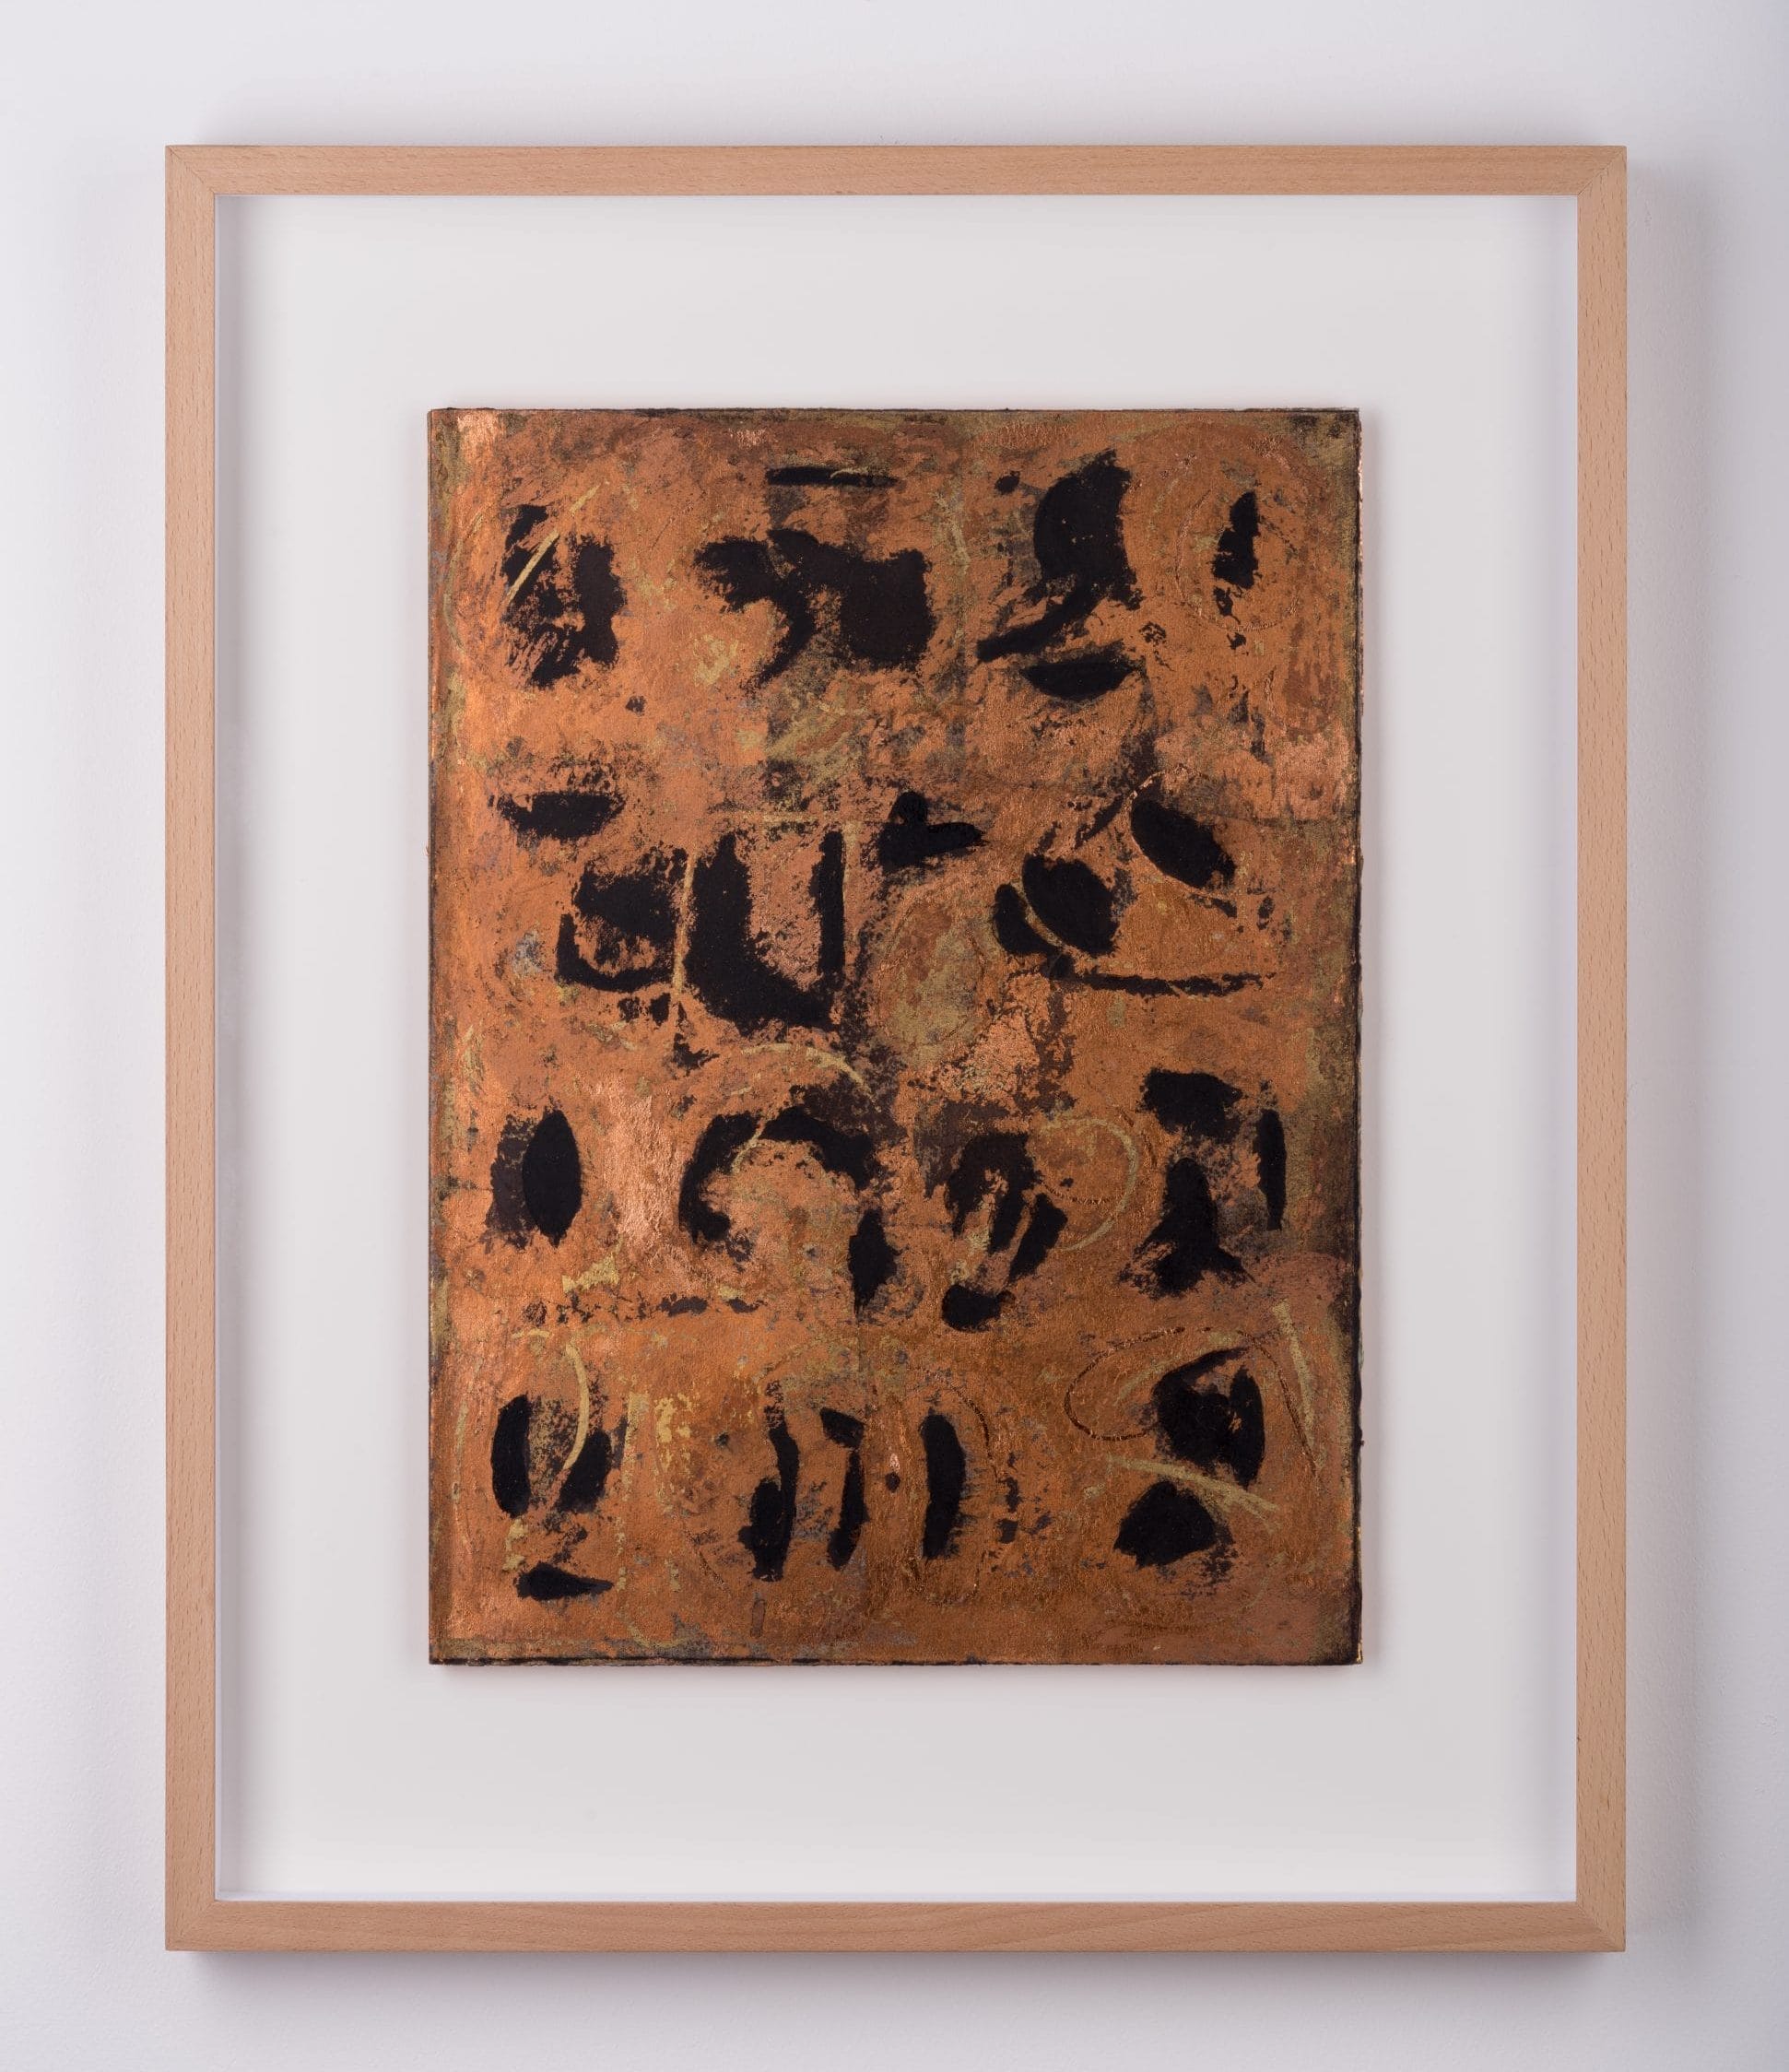 An image by John Newling, a copper background with black markings